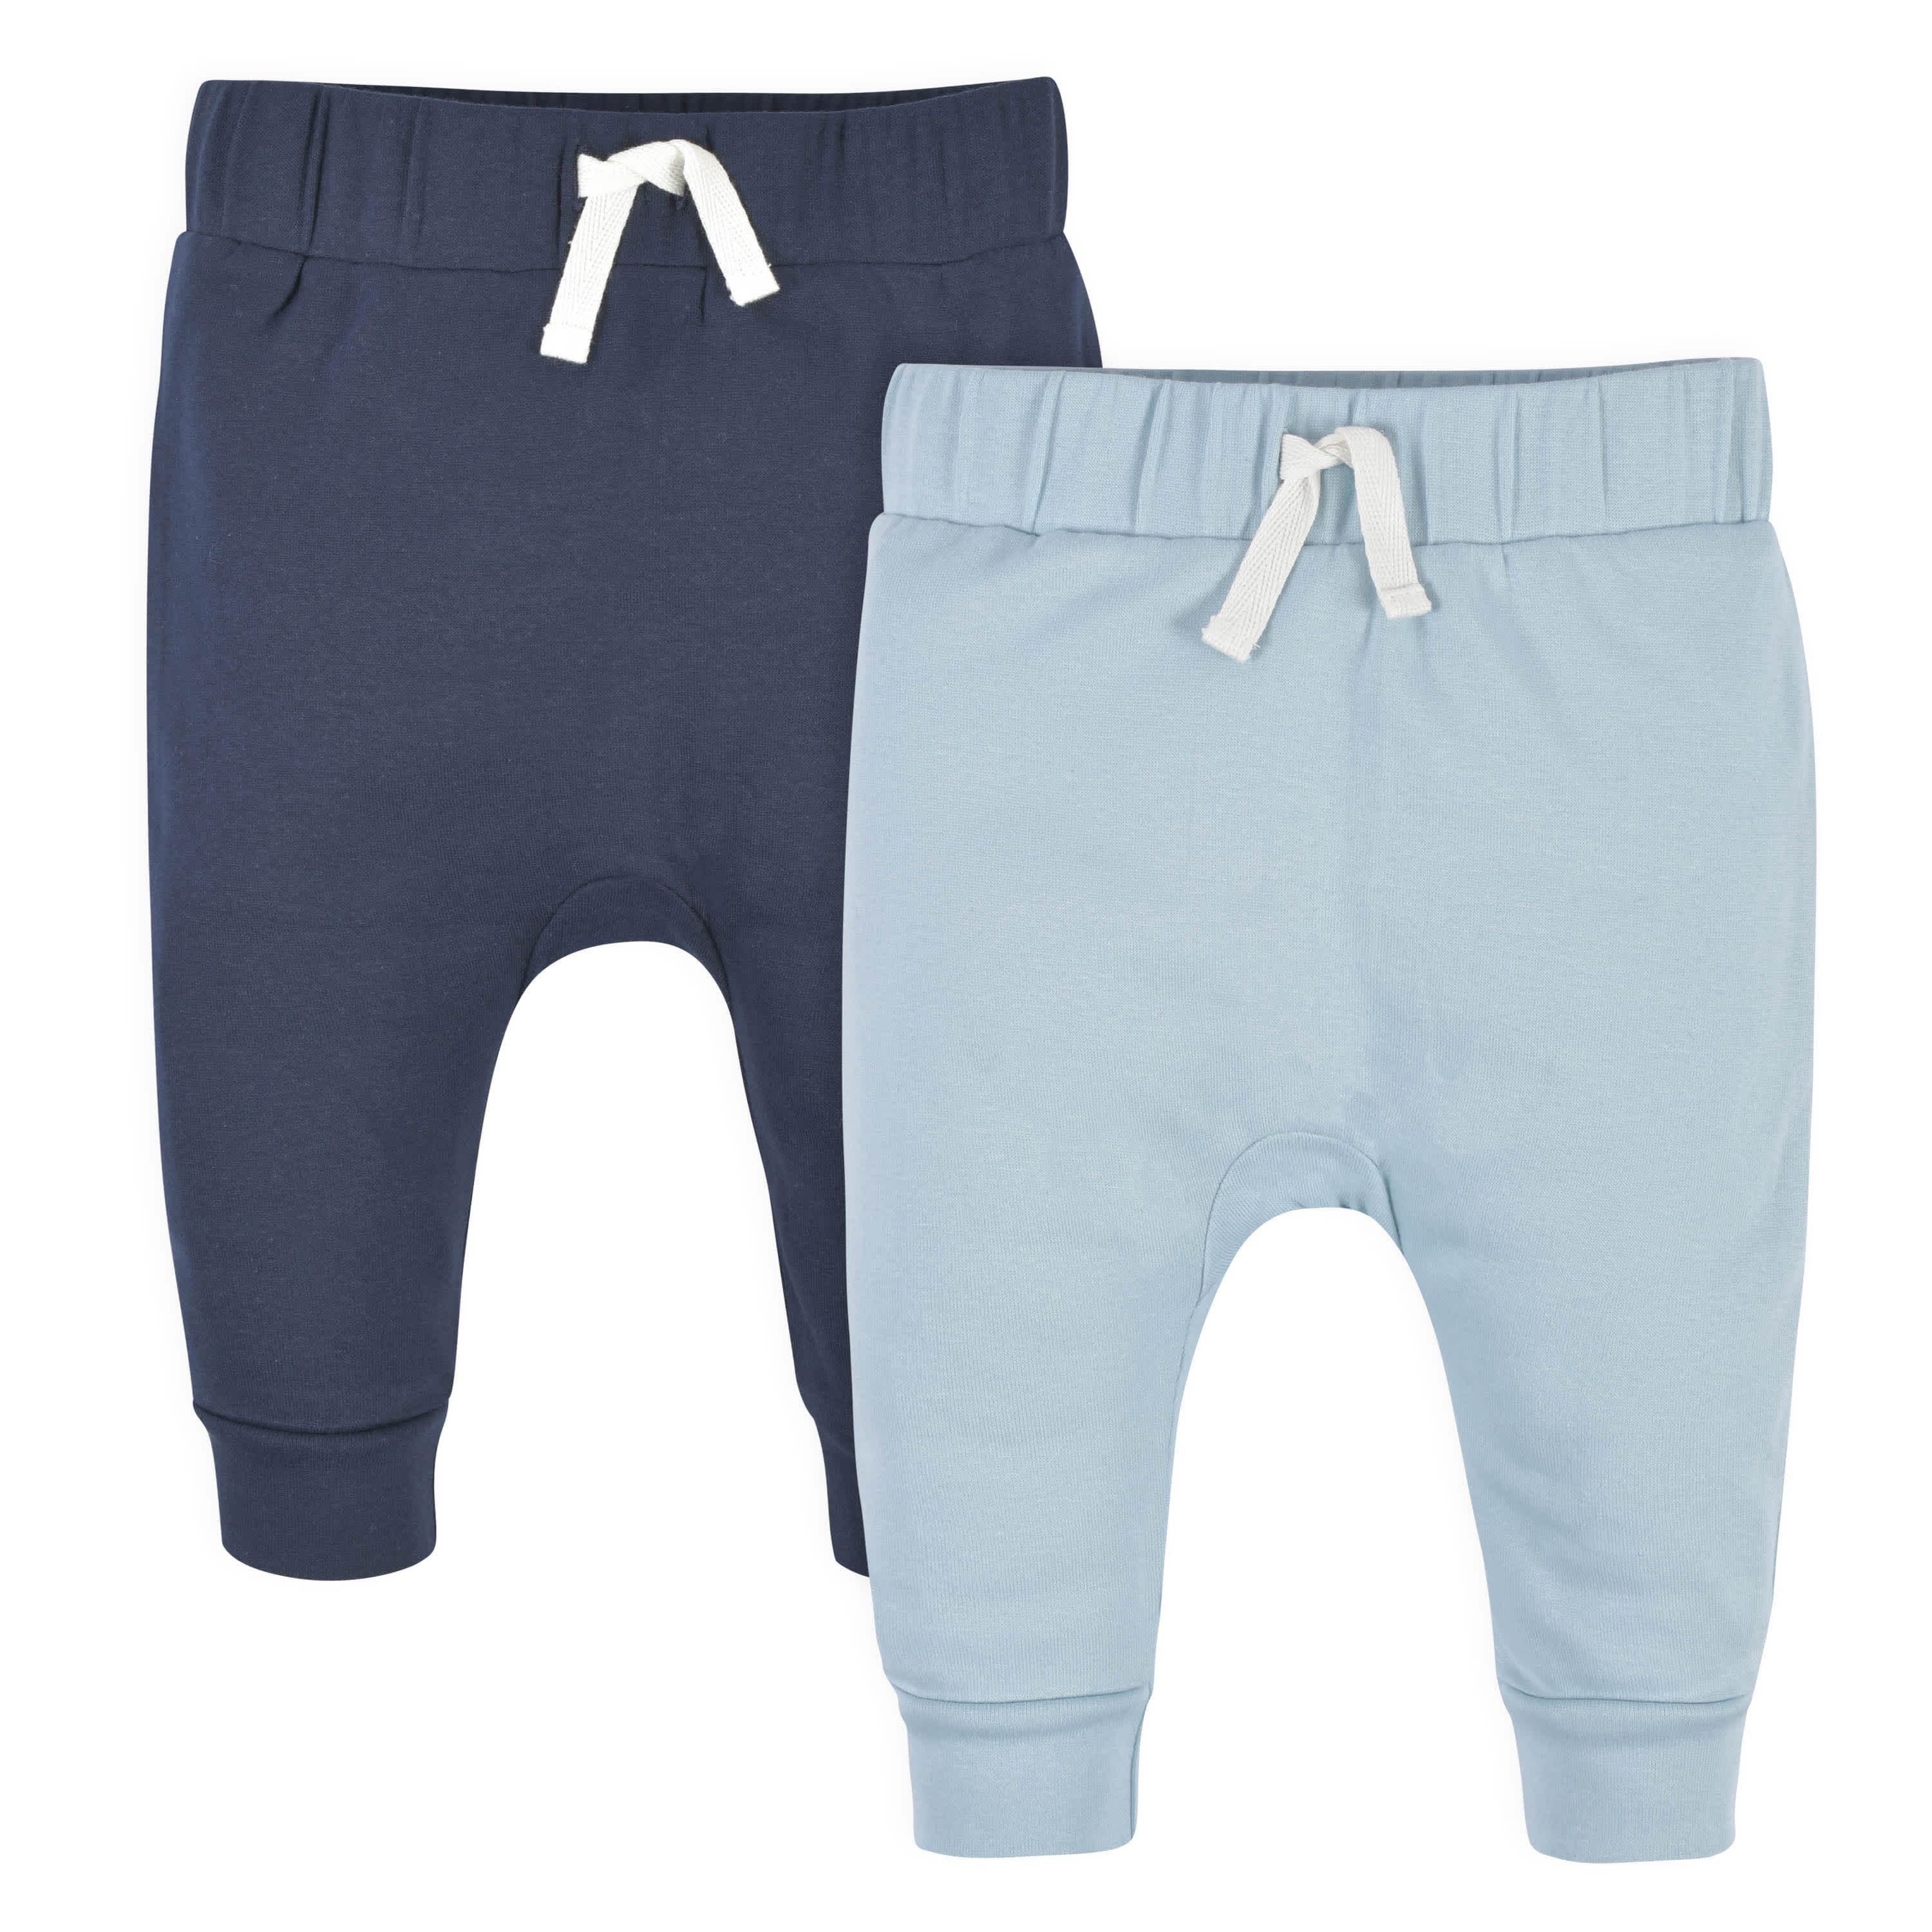 2-Pack Baby Boys Comfy Stretch Navy & Blue Pants | Gerber Childrenswear